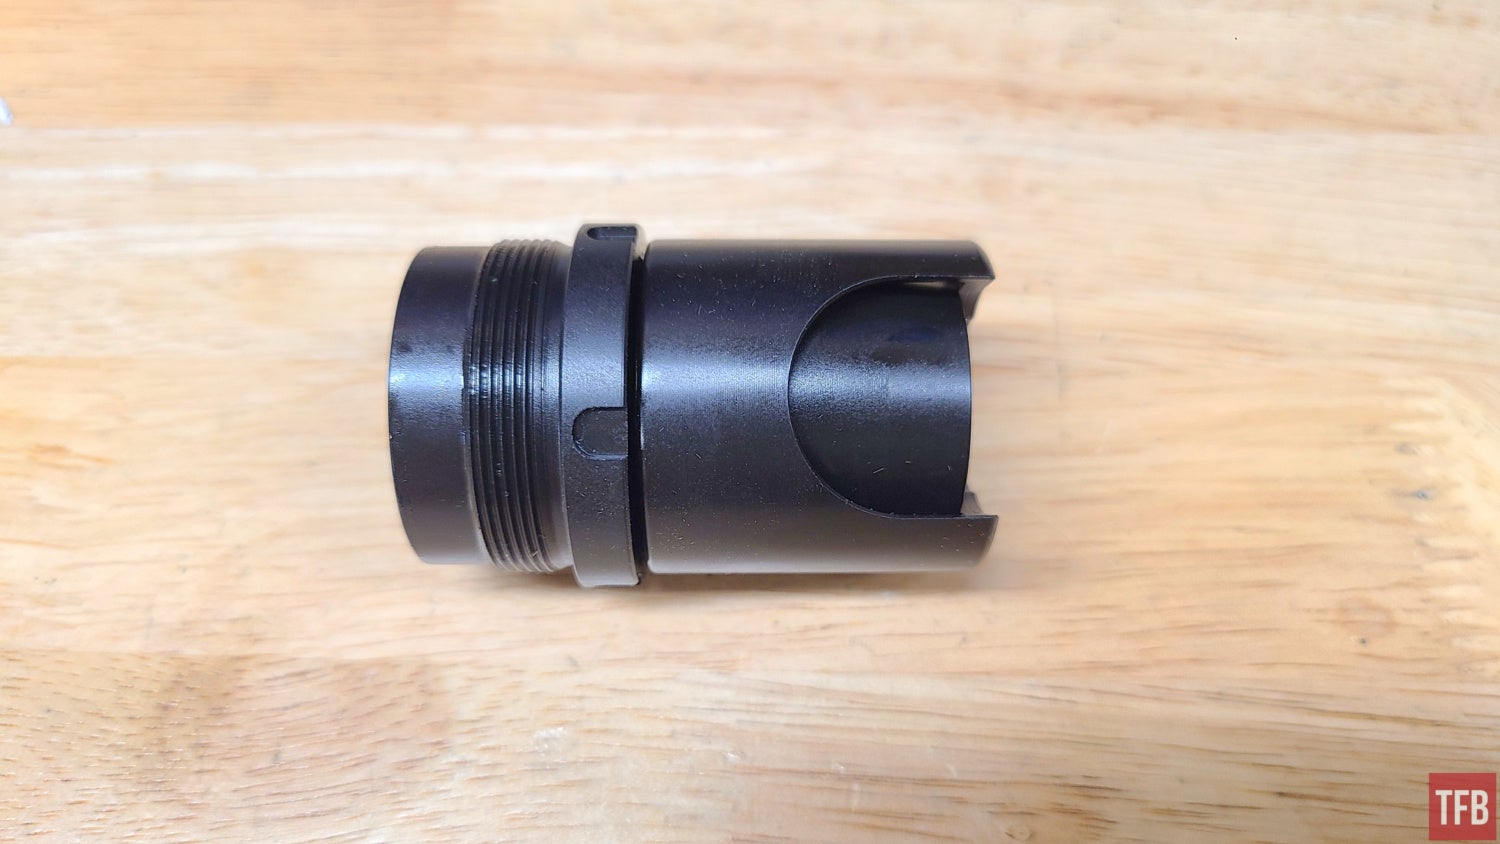 TFB Review: Griffin Armament A2 Adapter